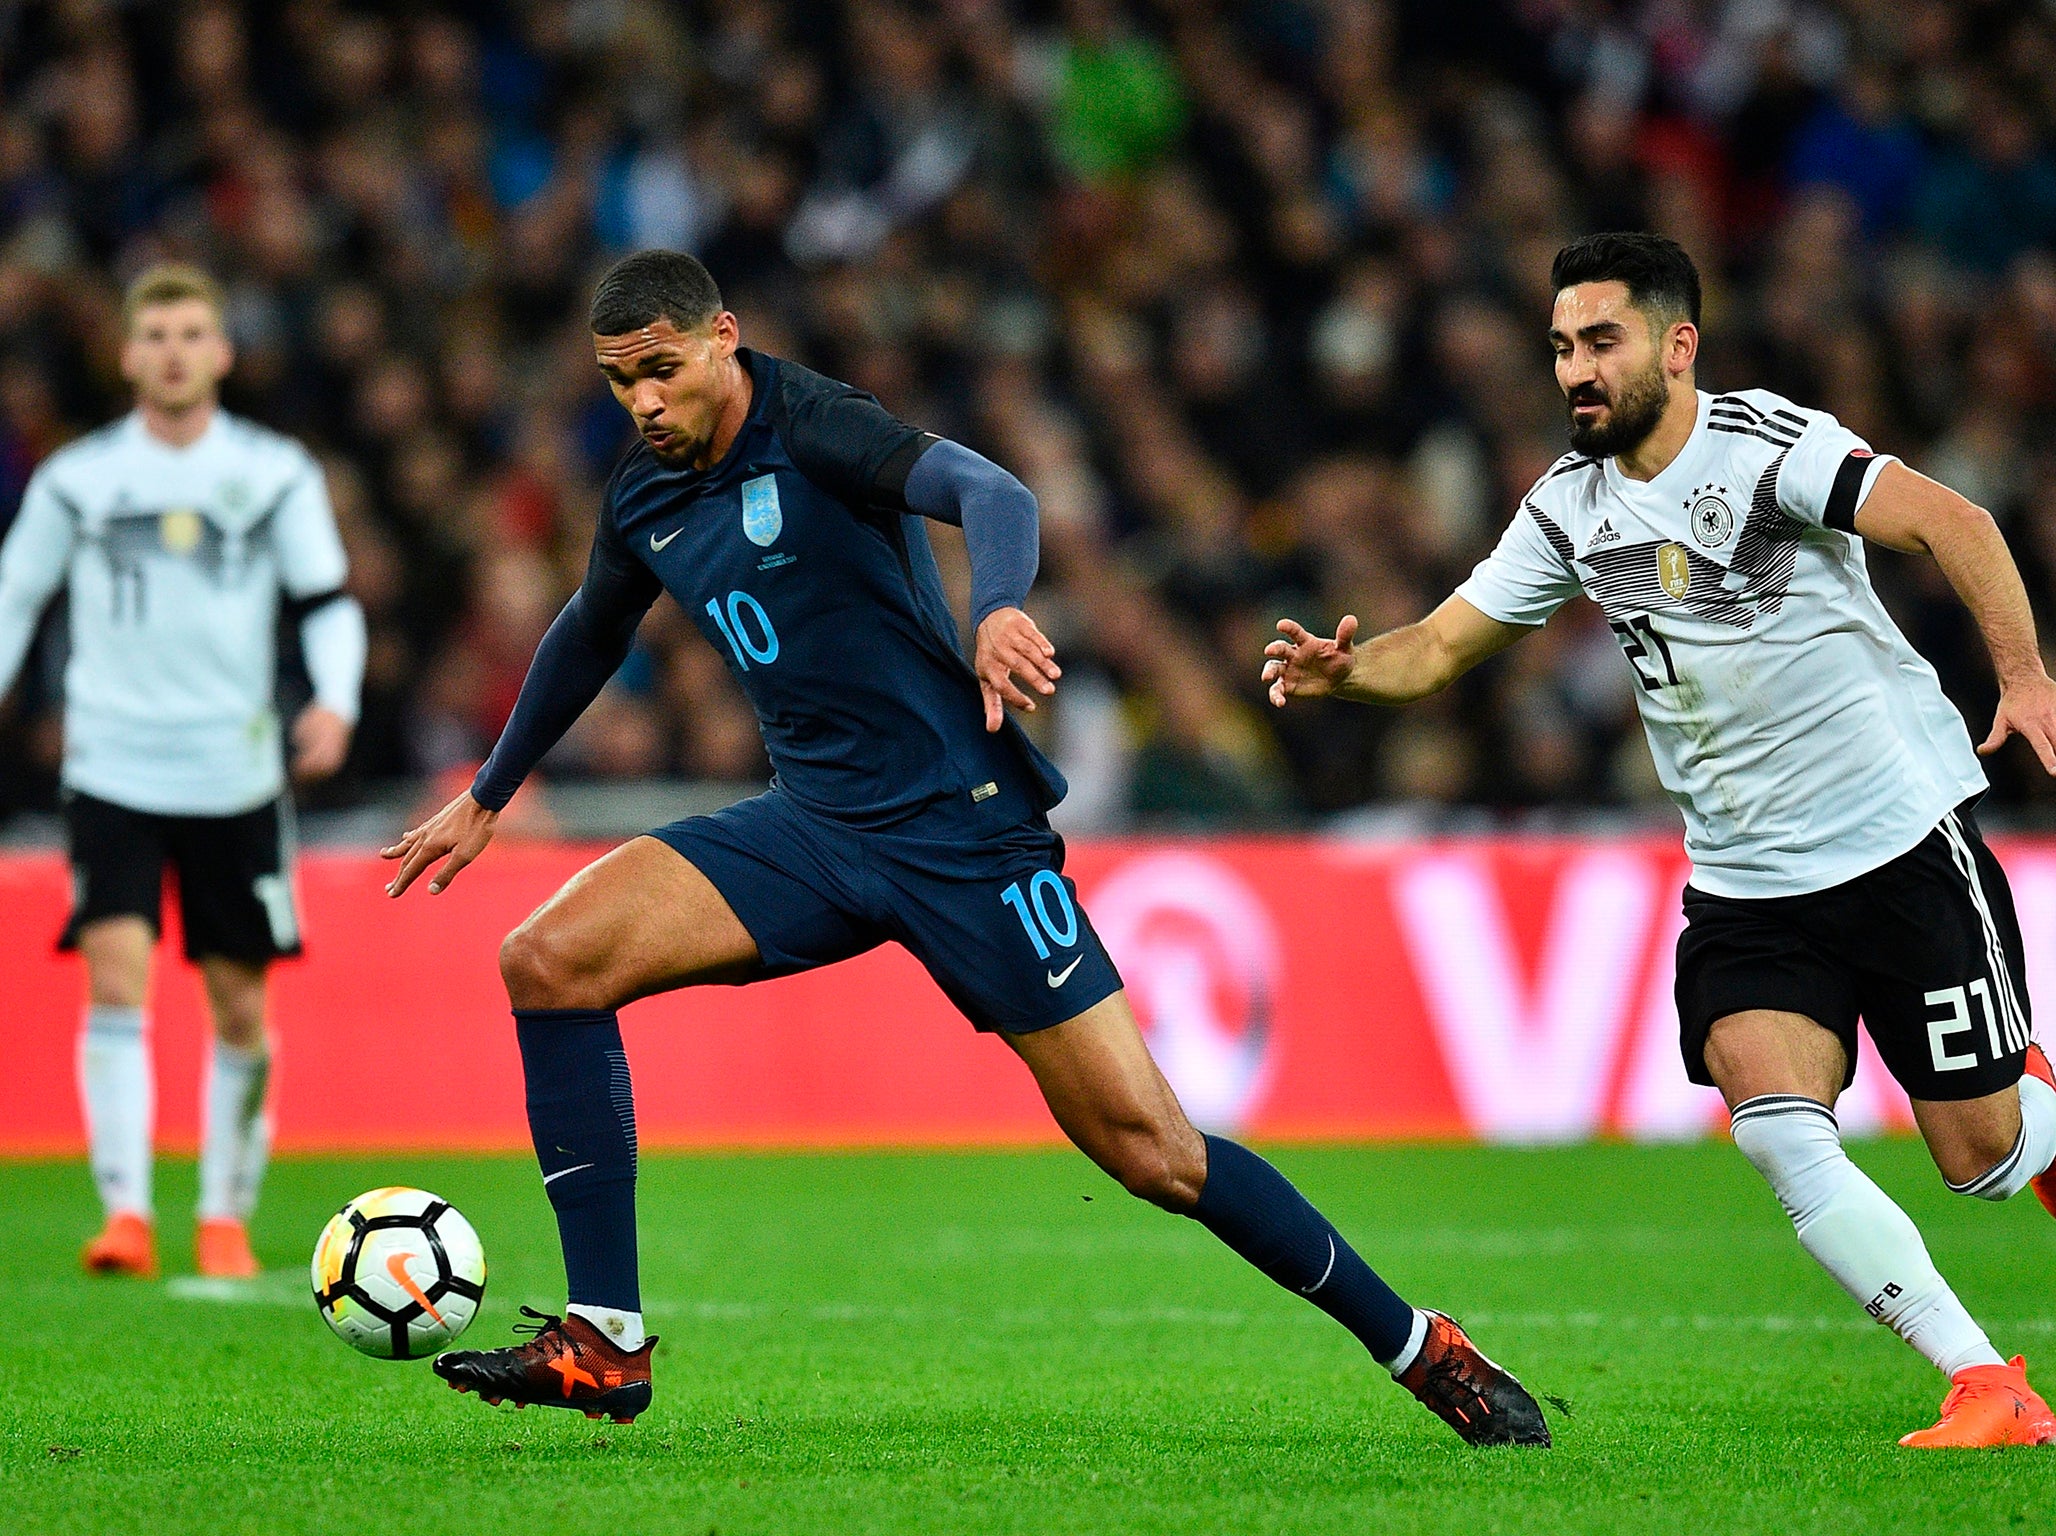 Loftus-Cheek was named Man of the Match for his encouraging display